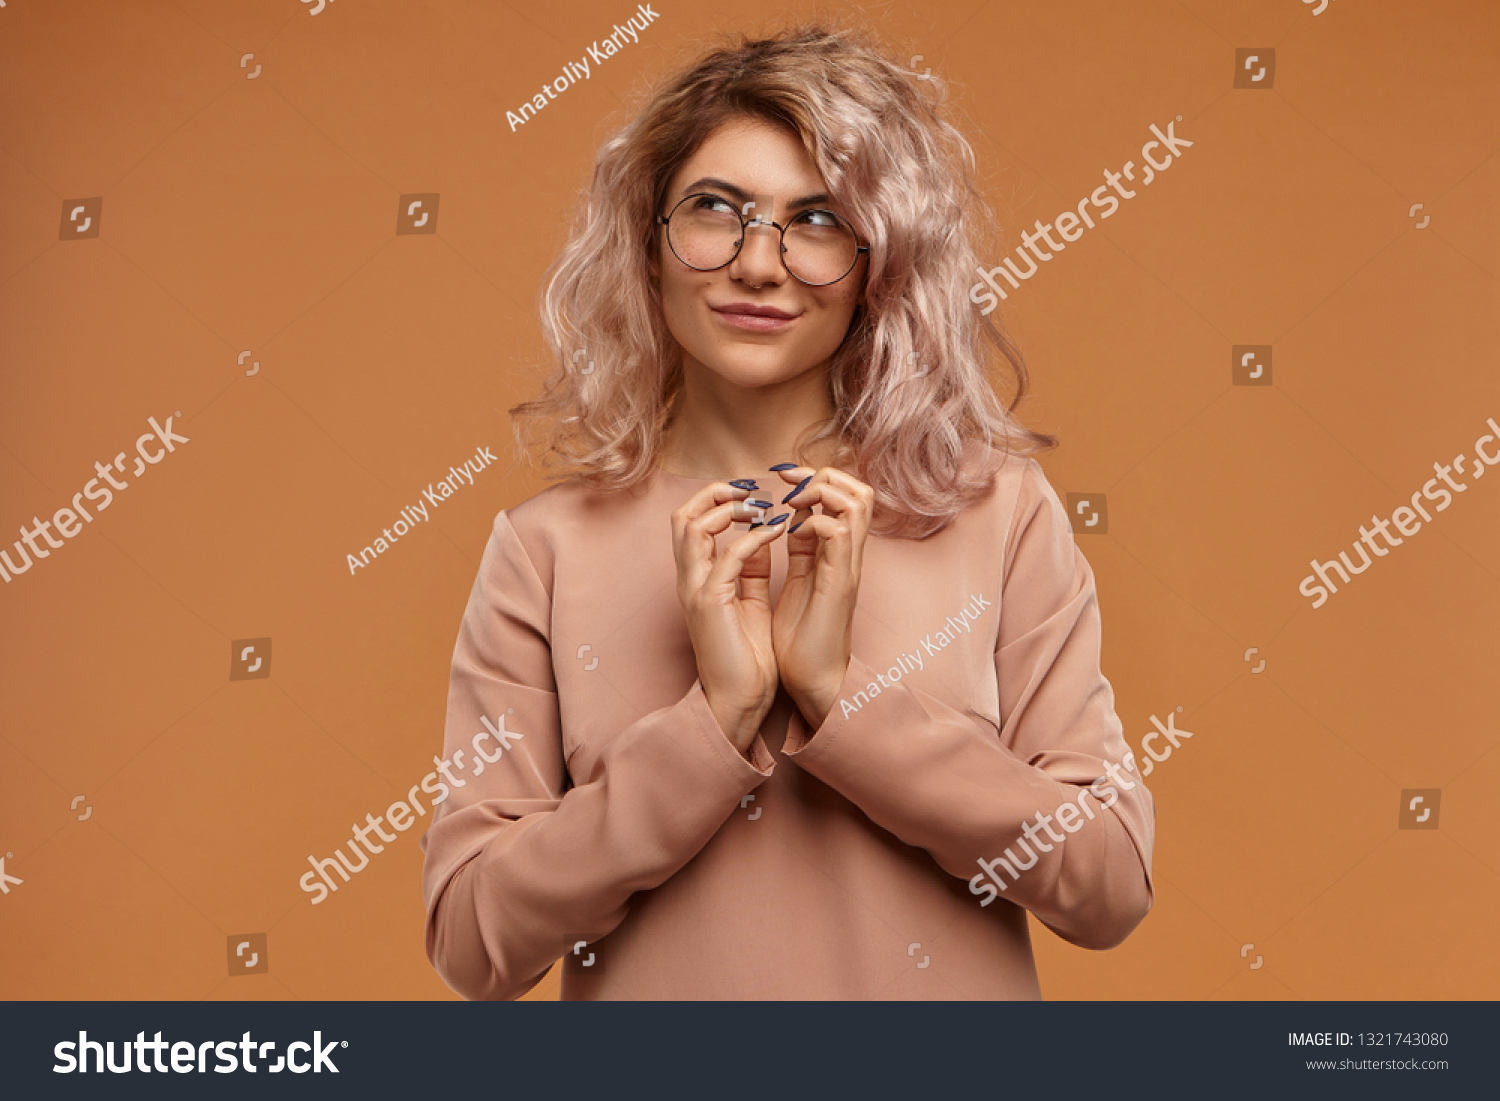 Sly hipster girl planning prank or evil trick, clasping hands and smiling mysteriously. Pensive cunning young woman in eyewear having tricky plan in mind, posing isolated at blank orange studio wall #1321743080